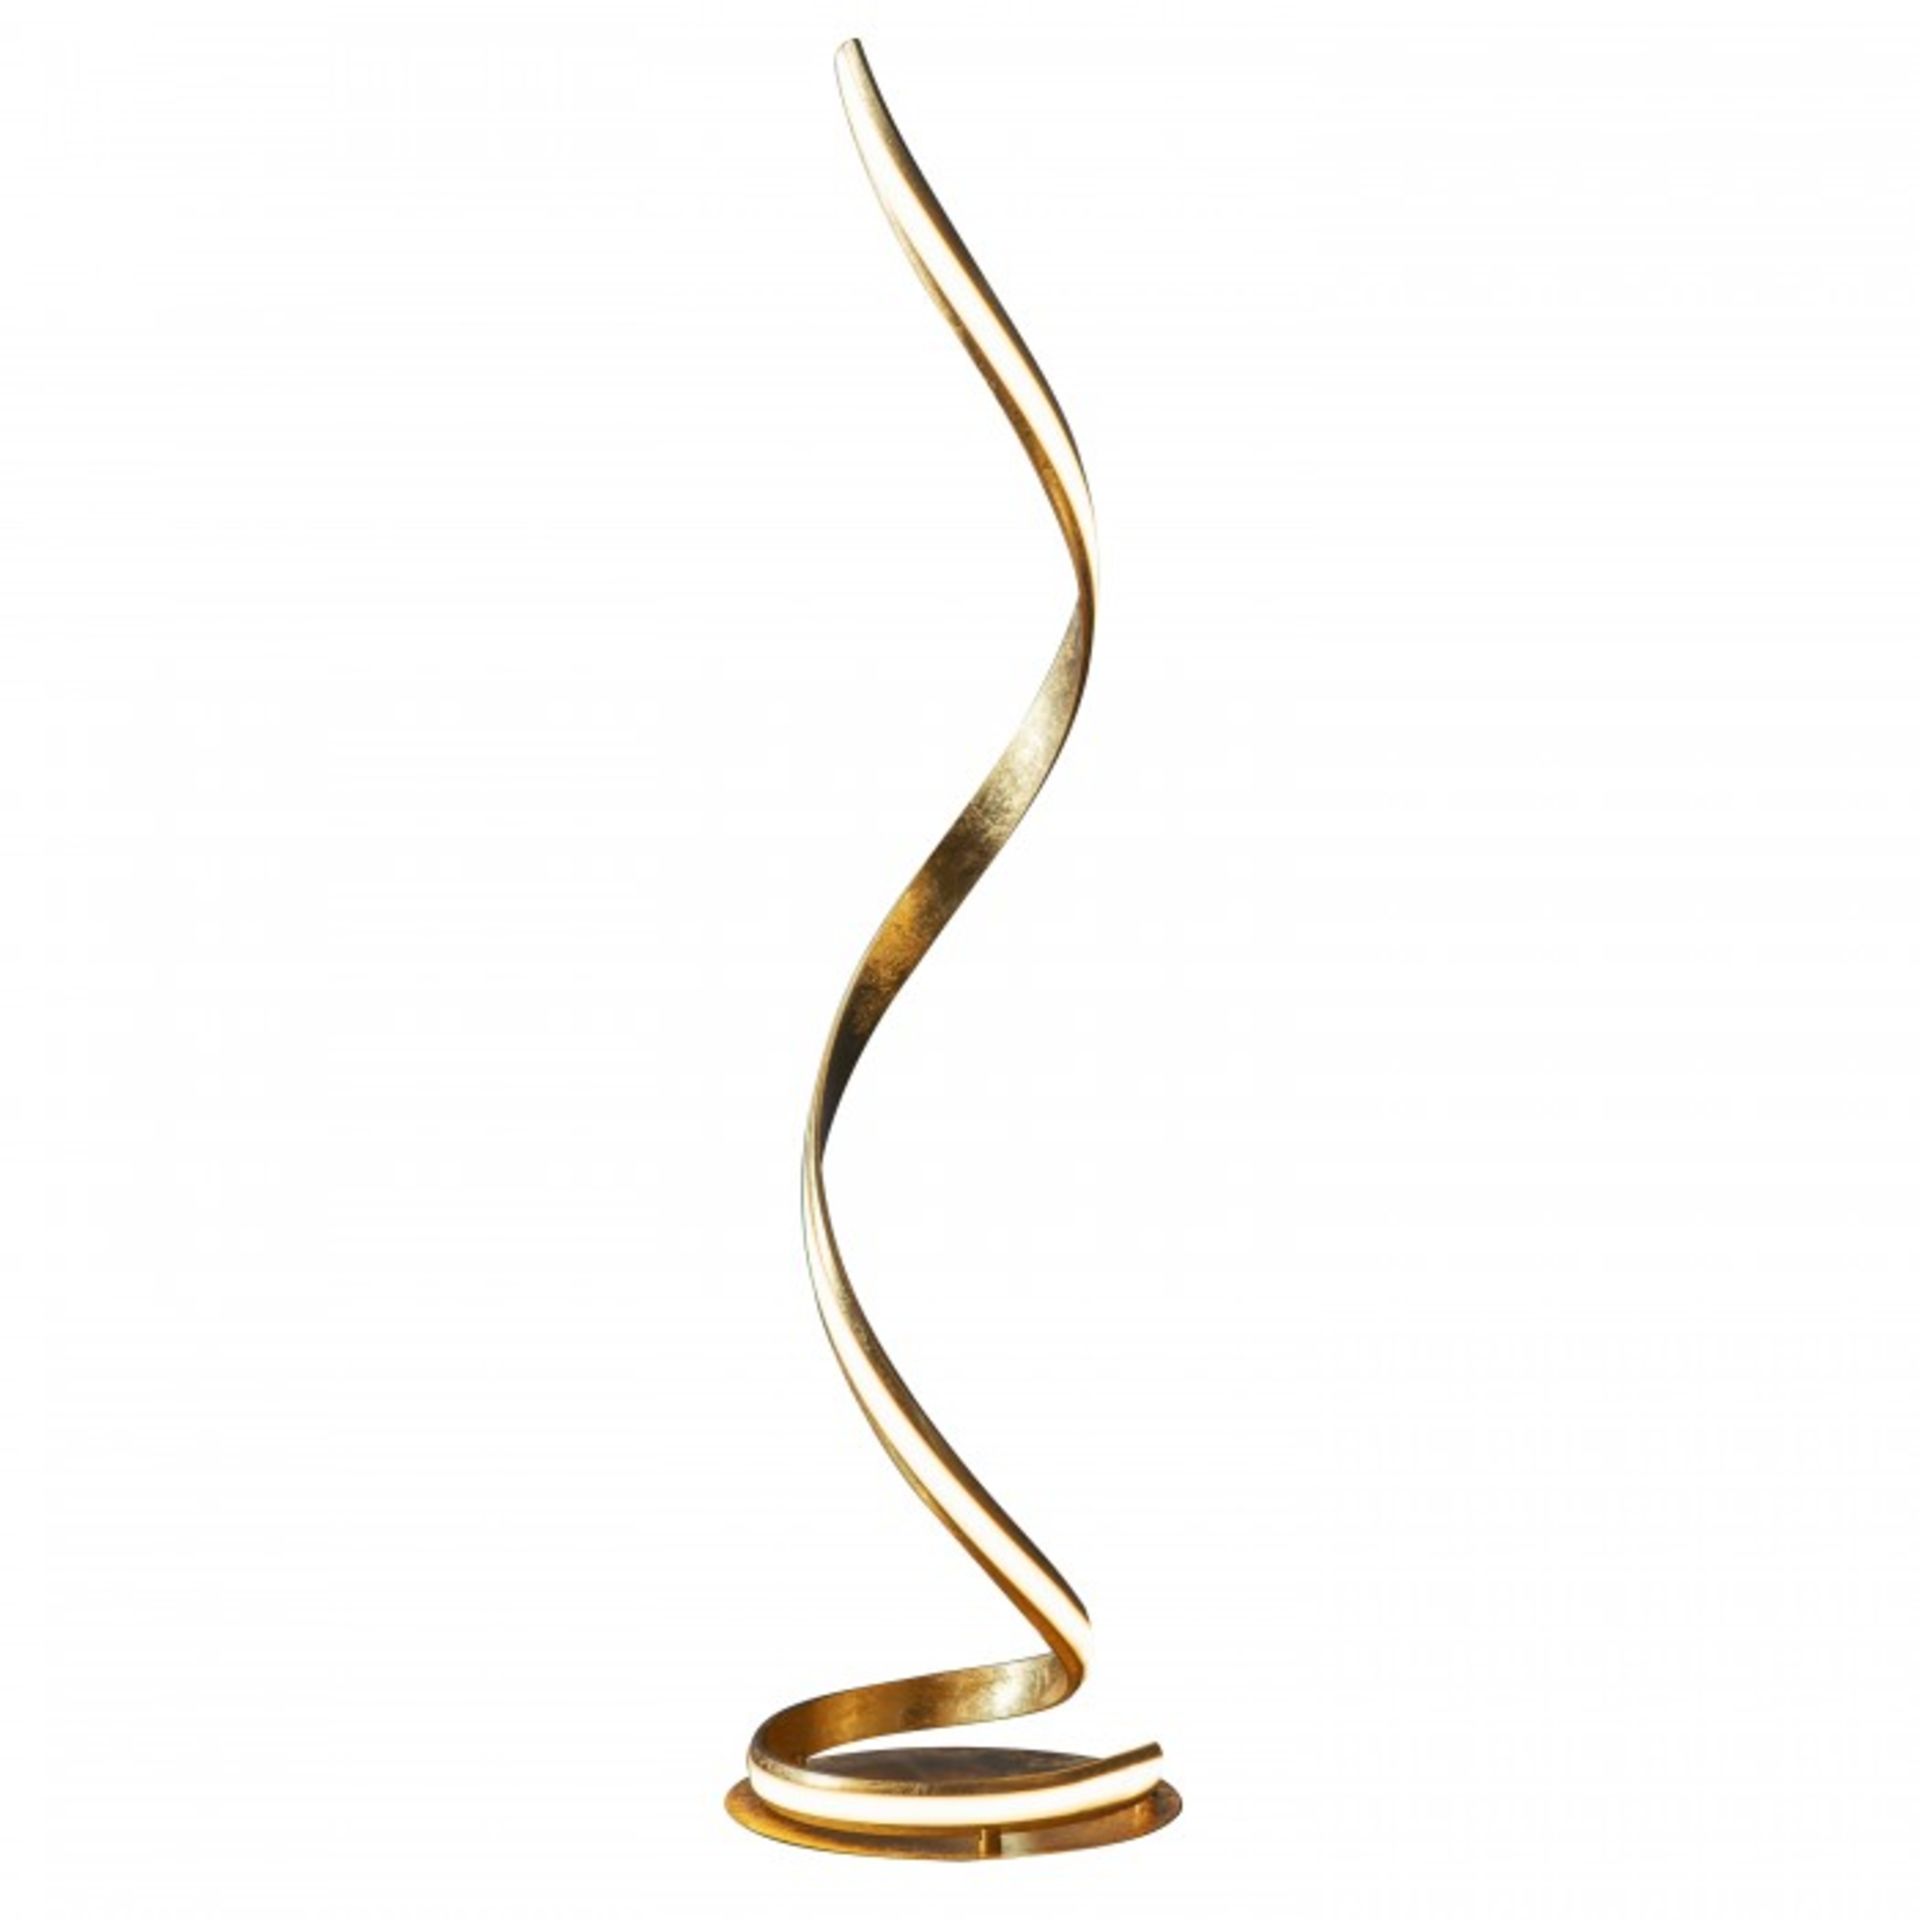 Saunby Floor Lamp Gold Leaf The Saunby Floor Lamp Gold Leaf is the latest addition to our stunning